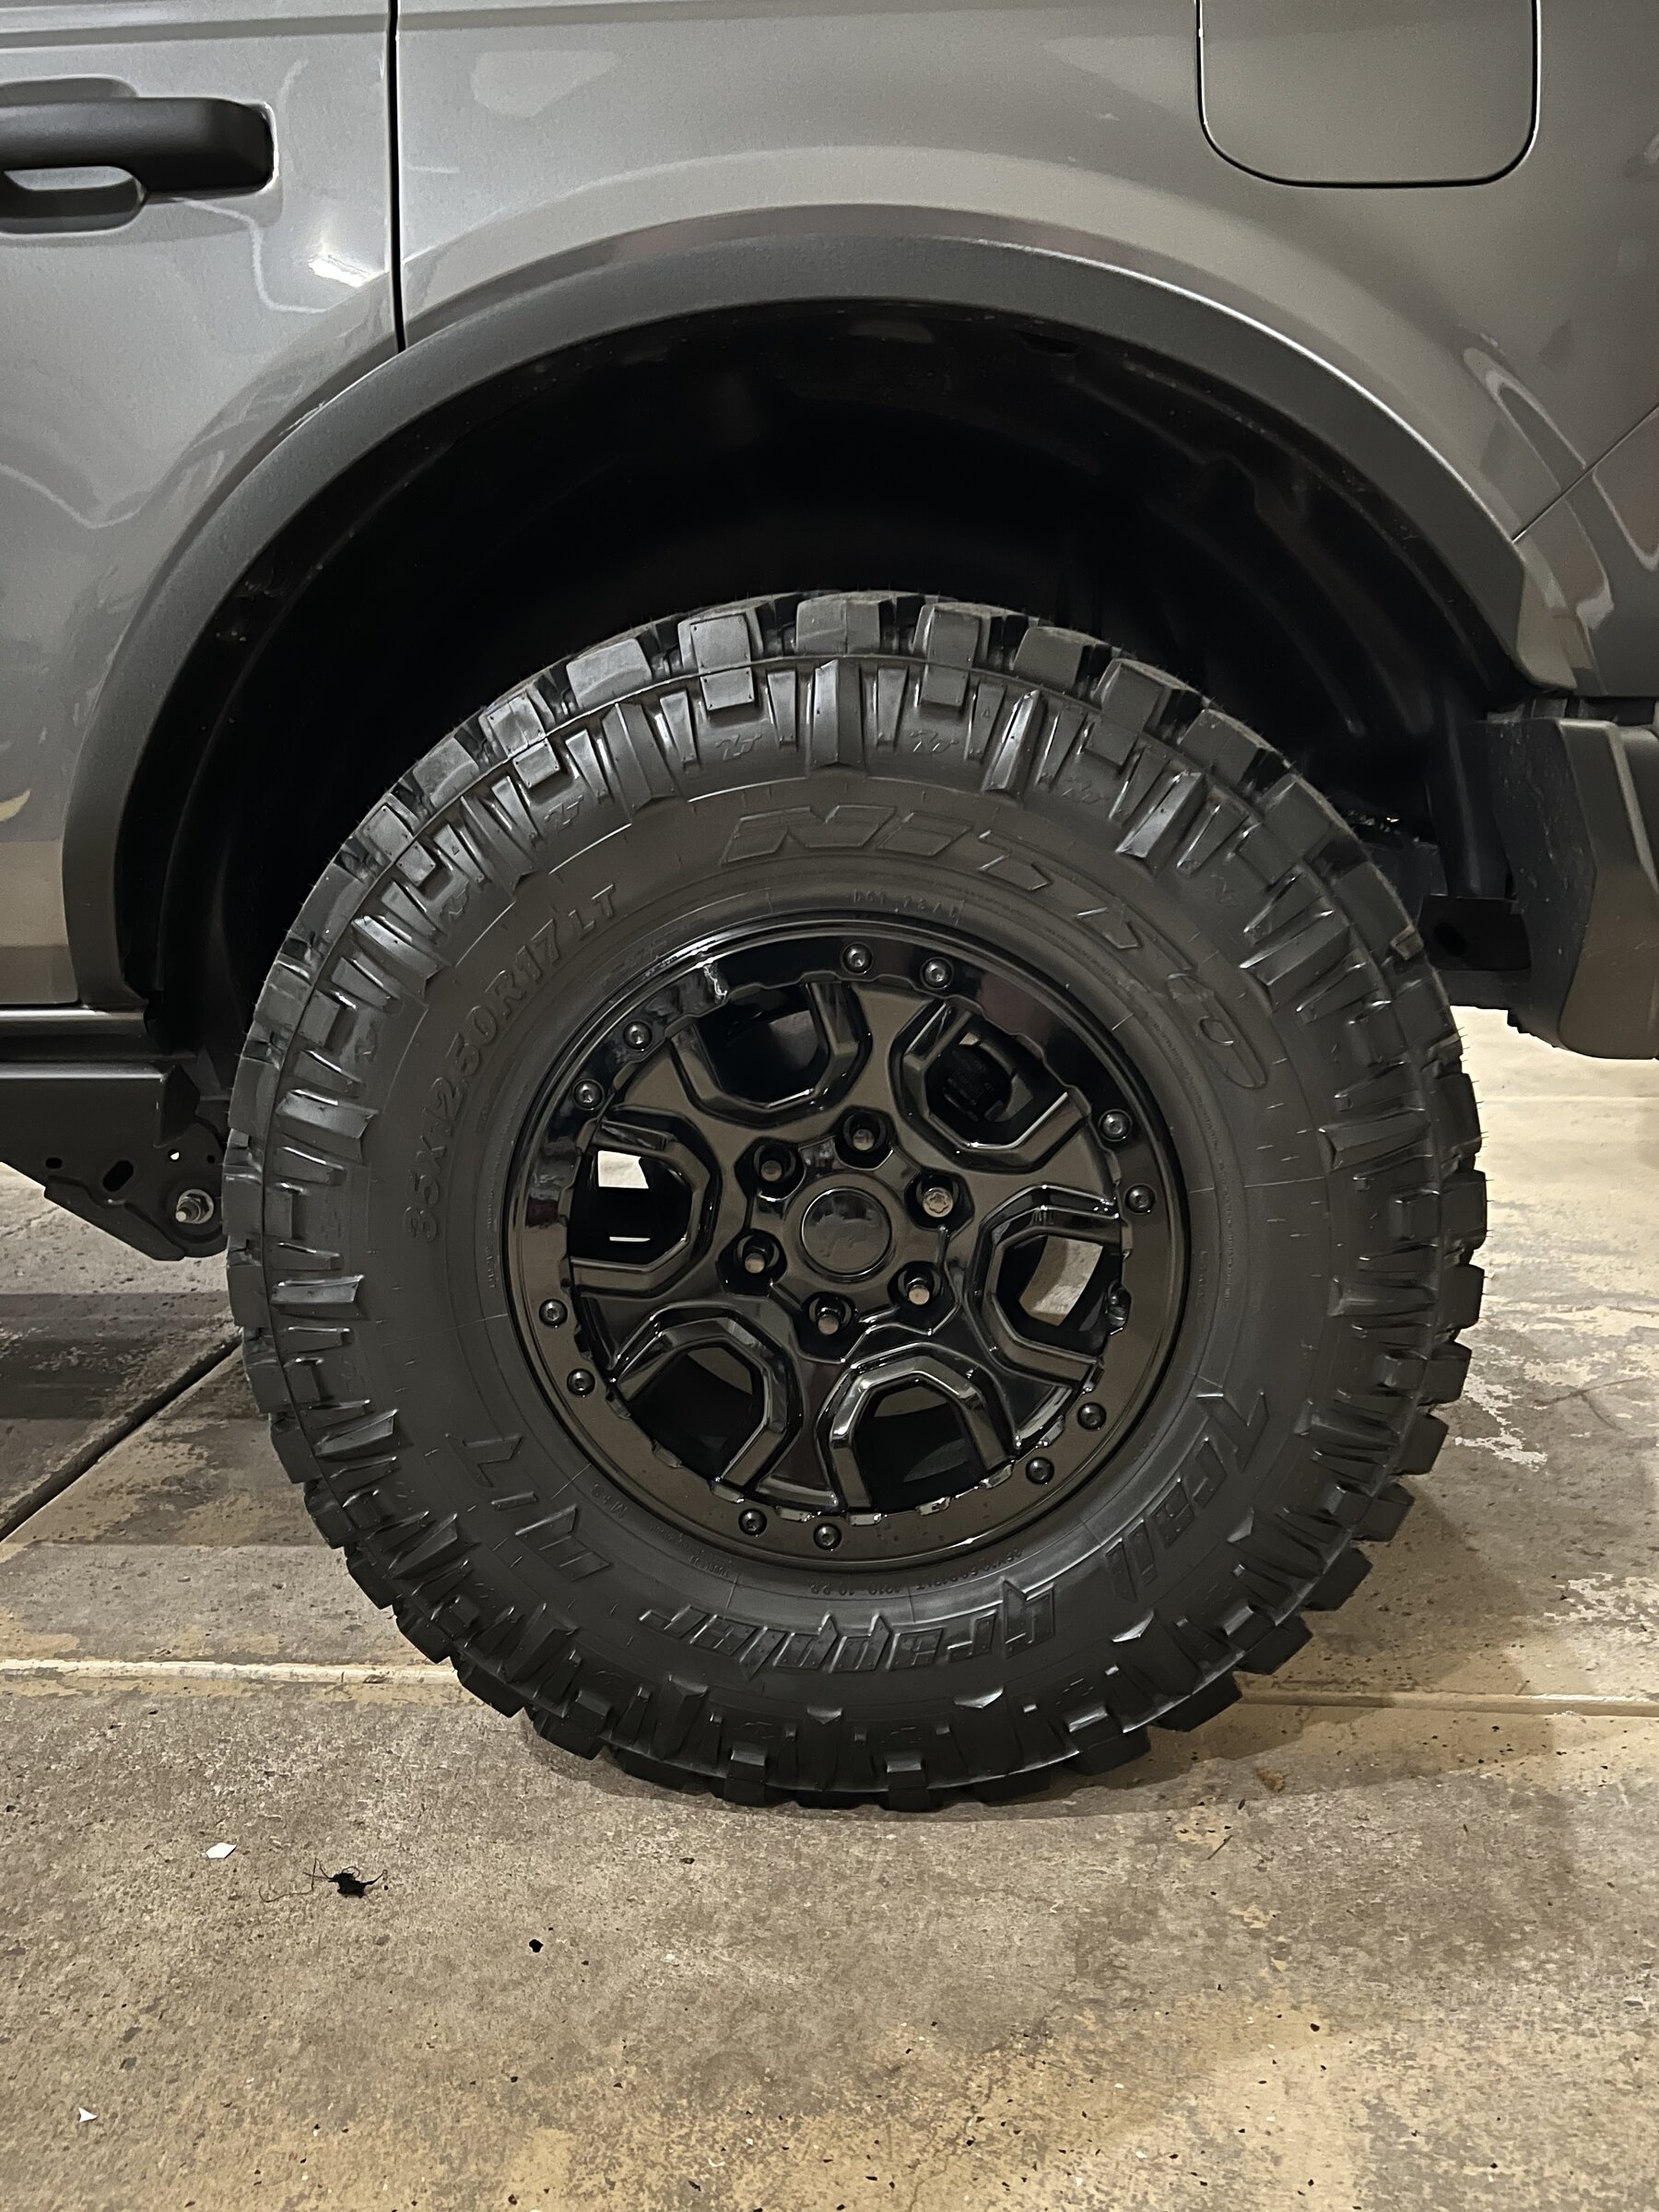 Ford Bronco Show us your installed wheel / tire upgrades here! (Pics) 12CF8D50-8692-4BDD-BD54-60B9B1896F2D